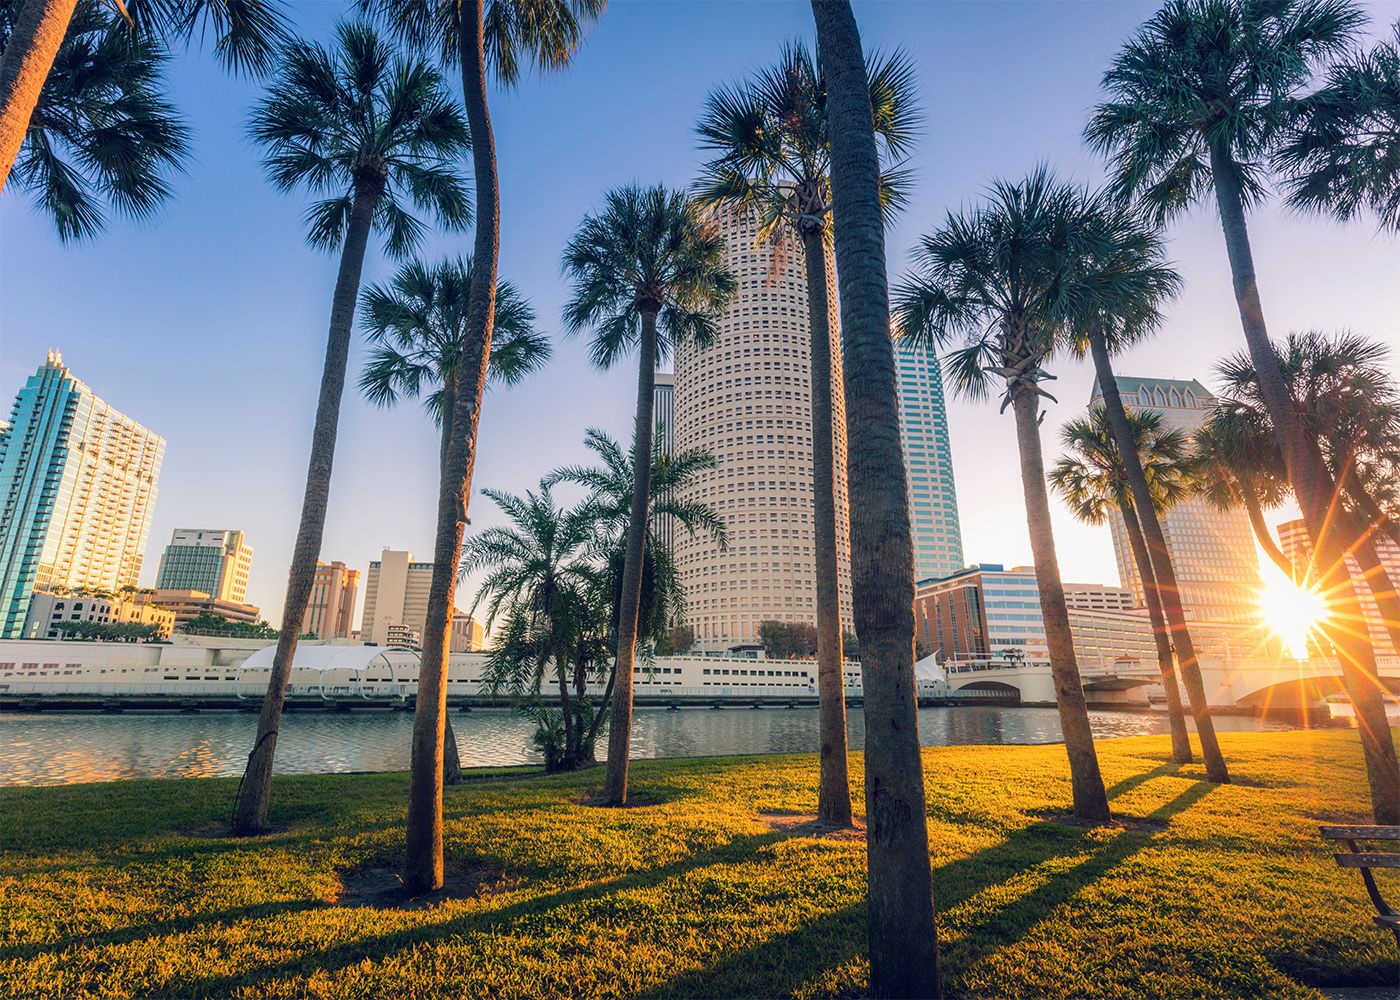 Palm trees in front of the Tampa, Florida skyline